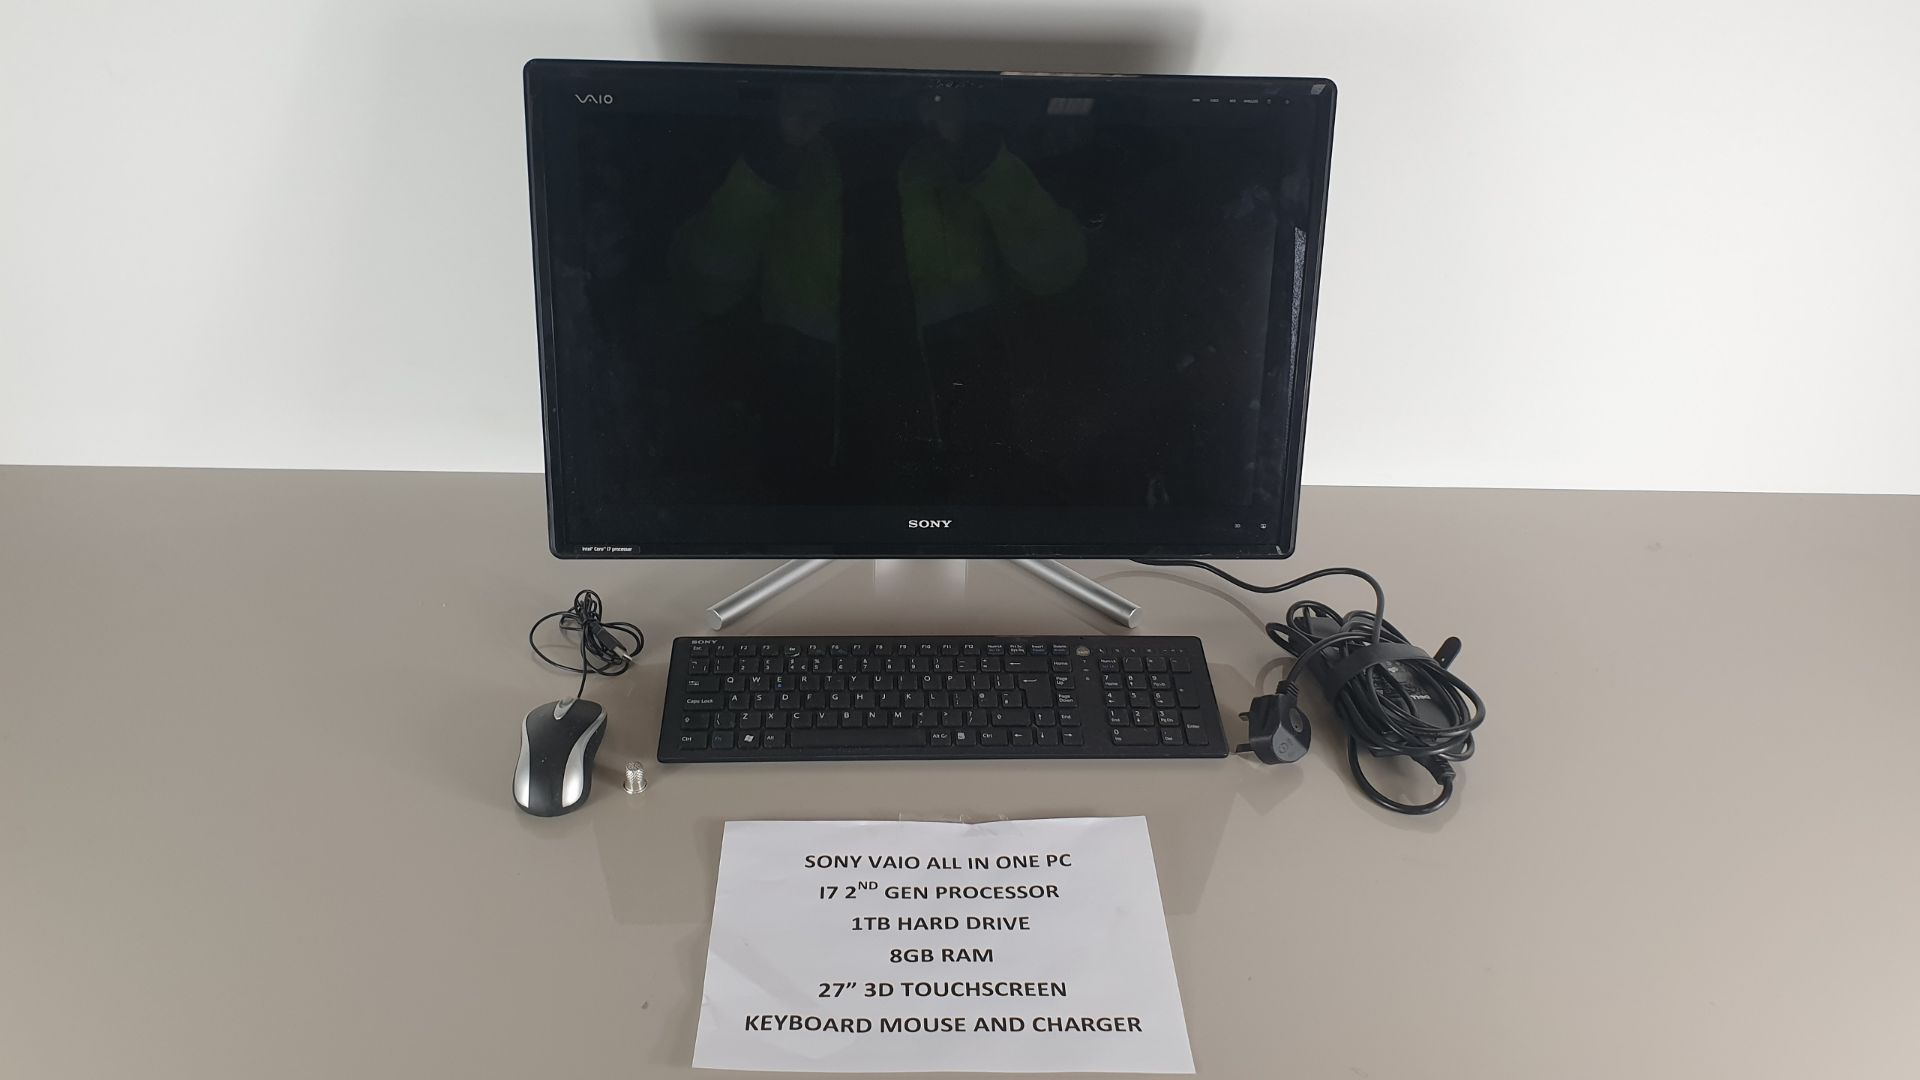 (LOT FOR THURSDAY 28TH MAY AUCTION) SONY VAIO ALL IN ONE PC - 17 2ND GEN PROCESSOR, 1TB HARD